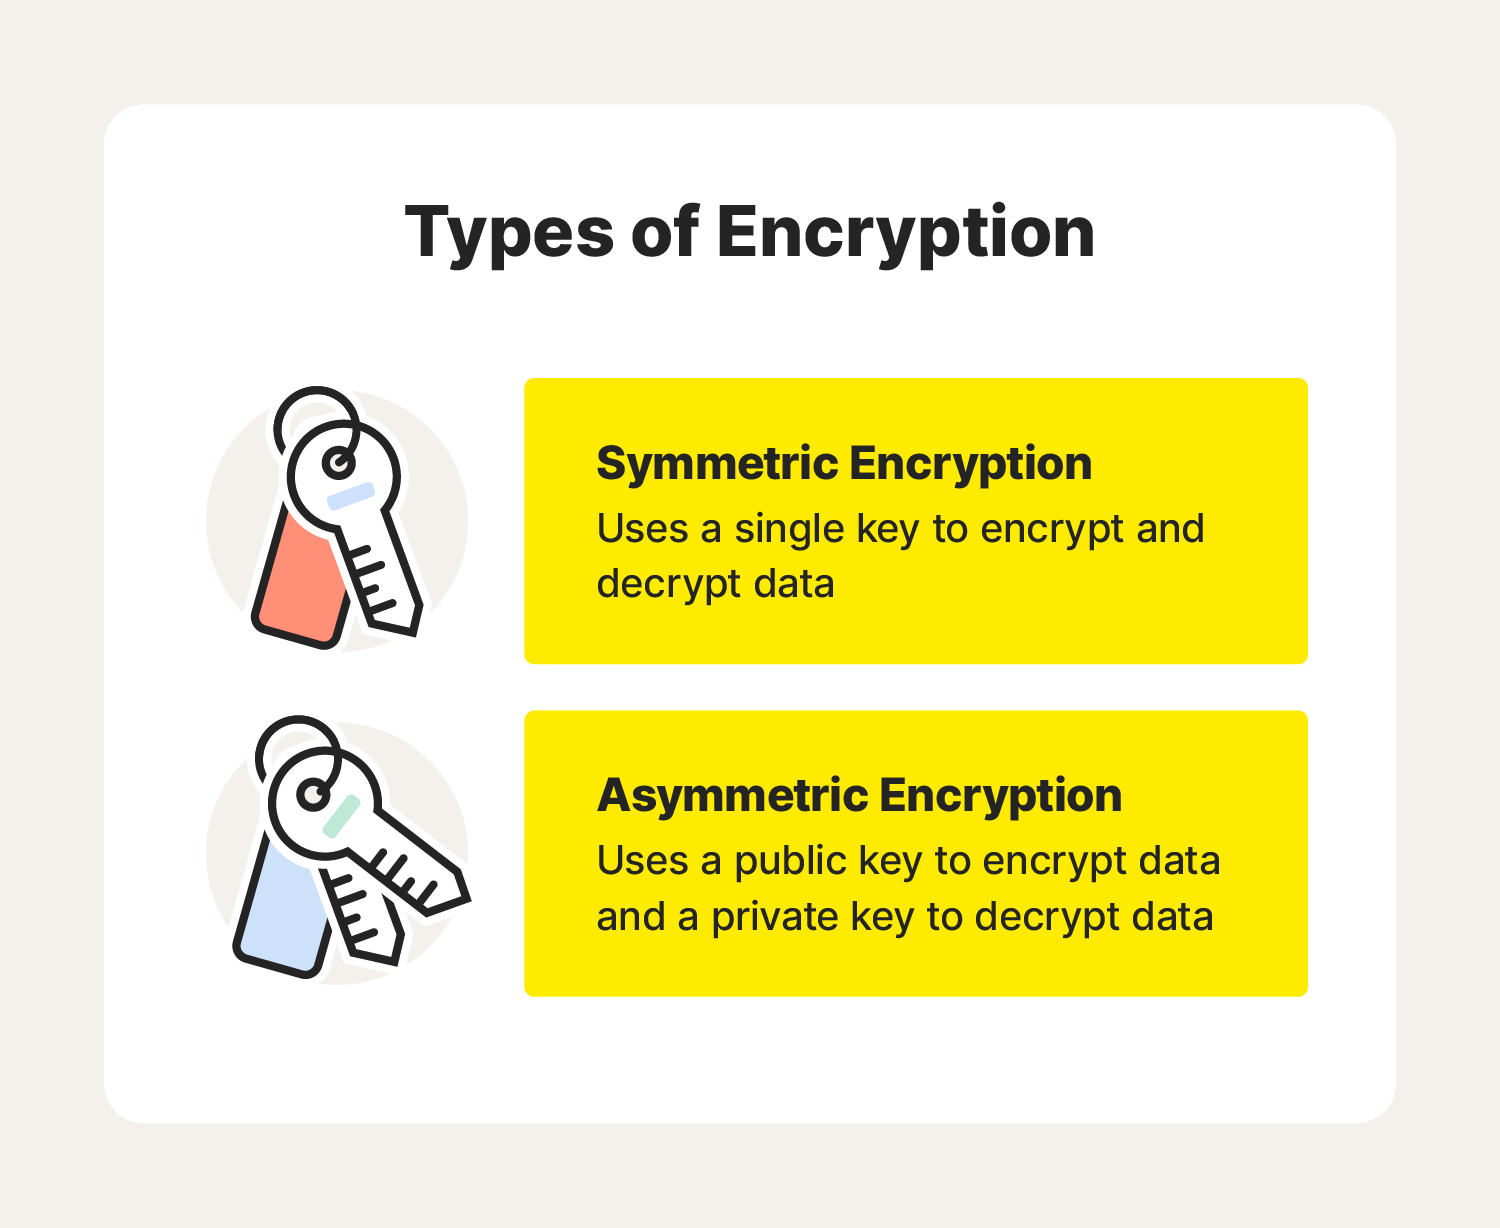 : An image explains the difference between symmetric and asymmetric encryption, further answering the question, "What is encryption?"